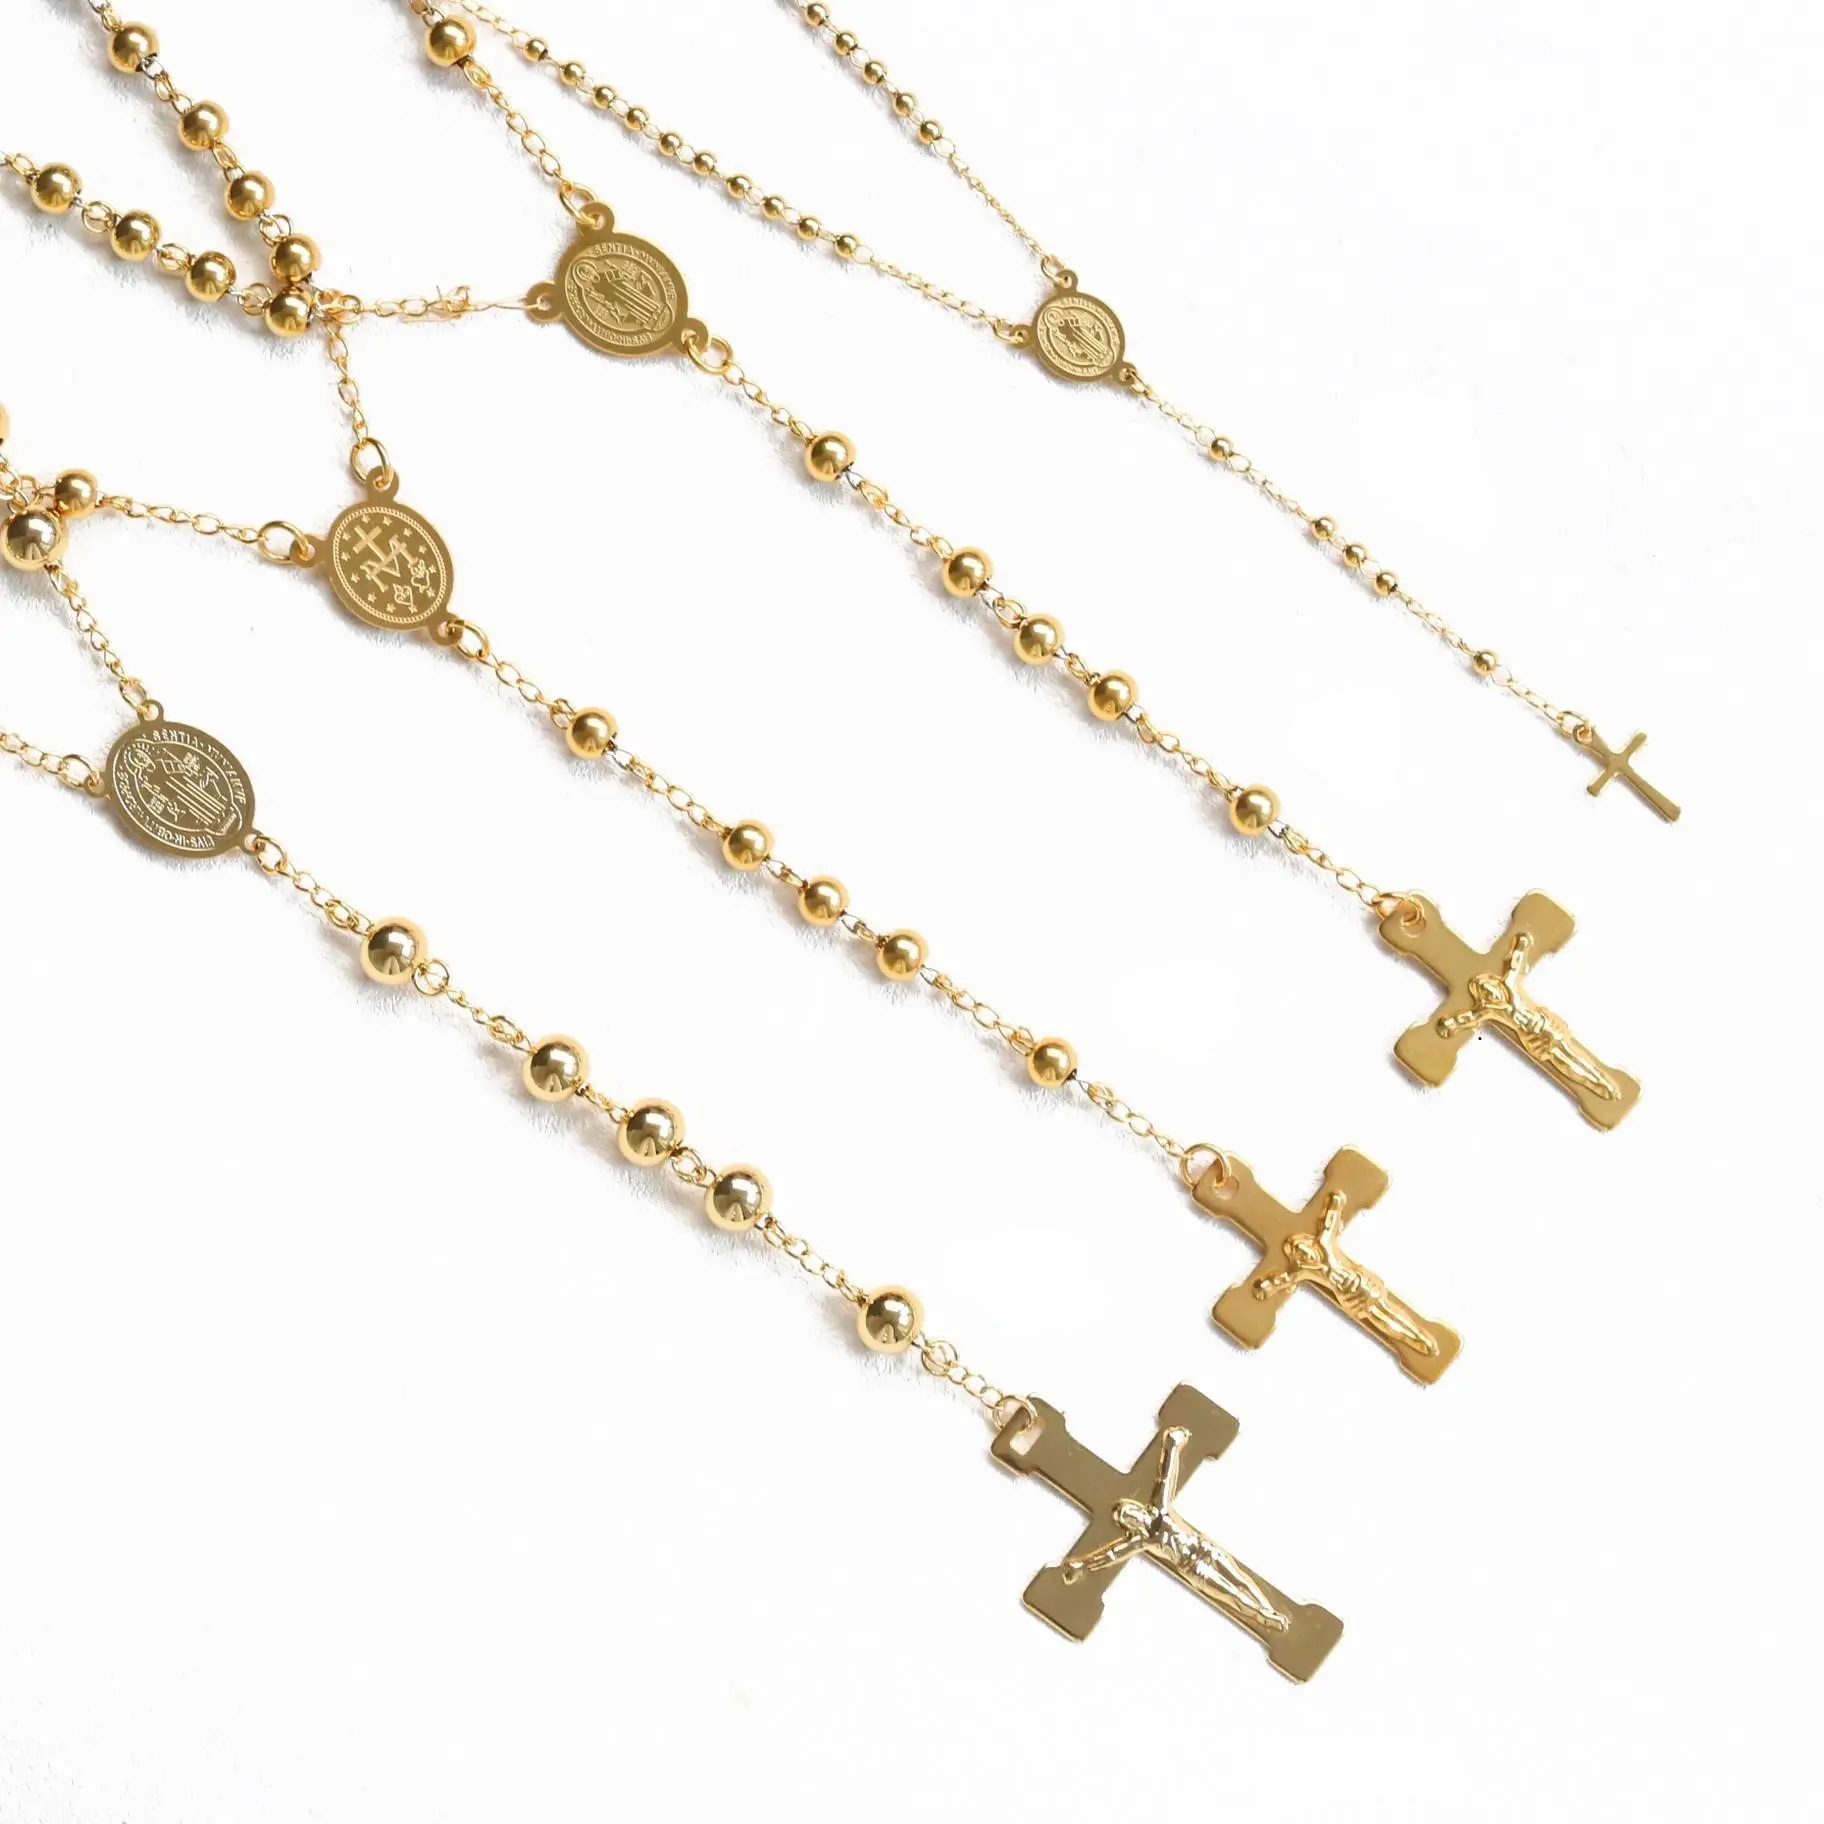 New Gold Rosary Bead Y Necklace Religious Jewelry Catholic 14K 18K 22K 24K Gold Plated Chain Jesus Cross Pendant Rosary Necklace